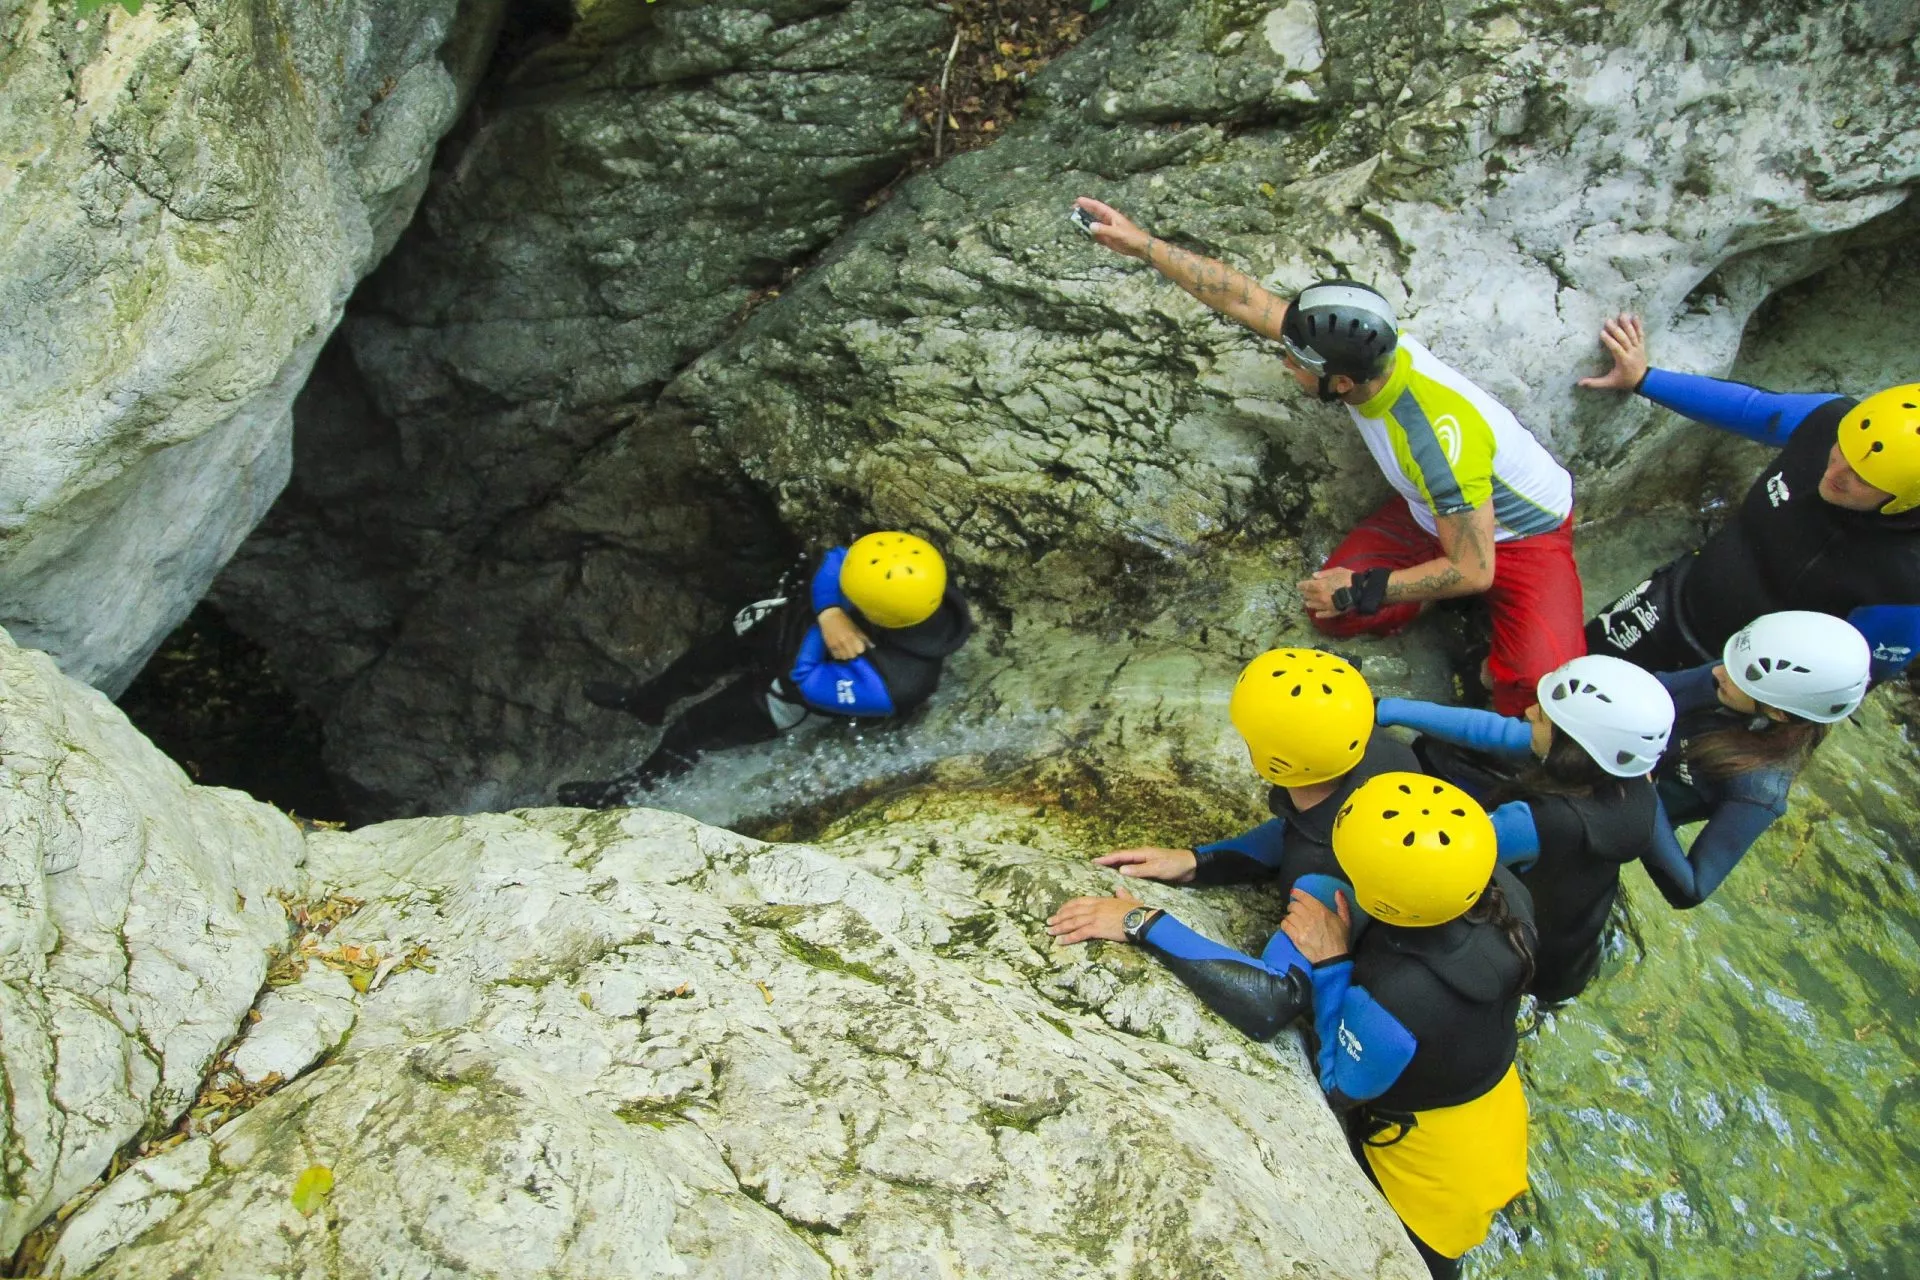 Sliding down the rocks during canyoning